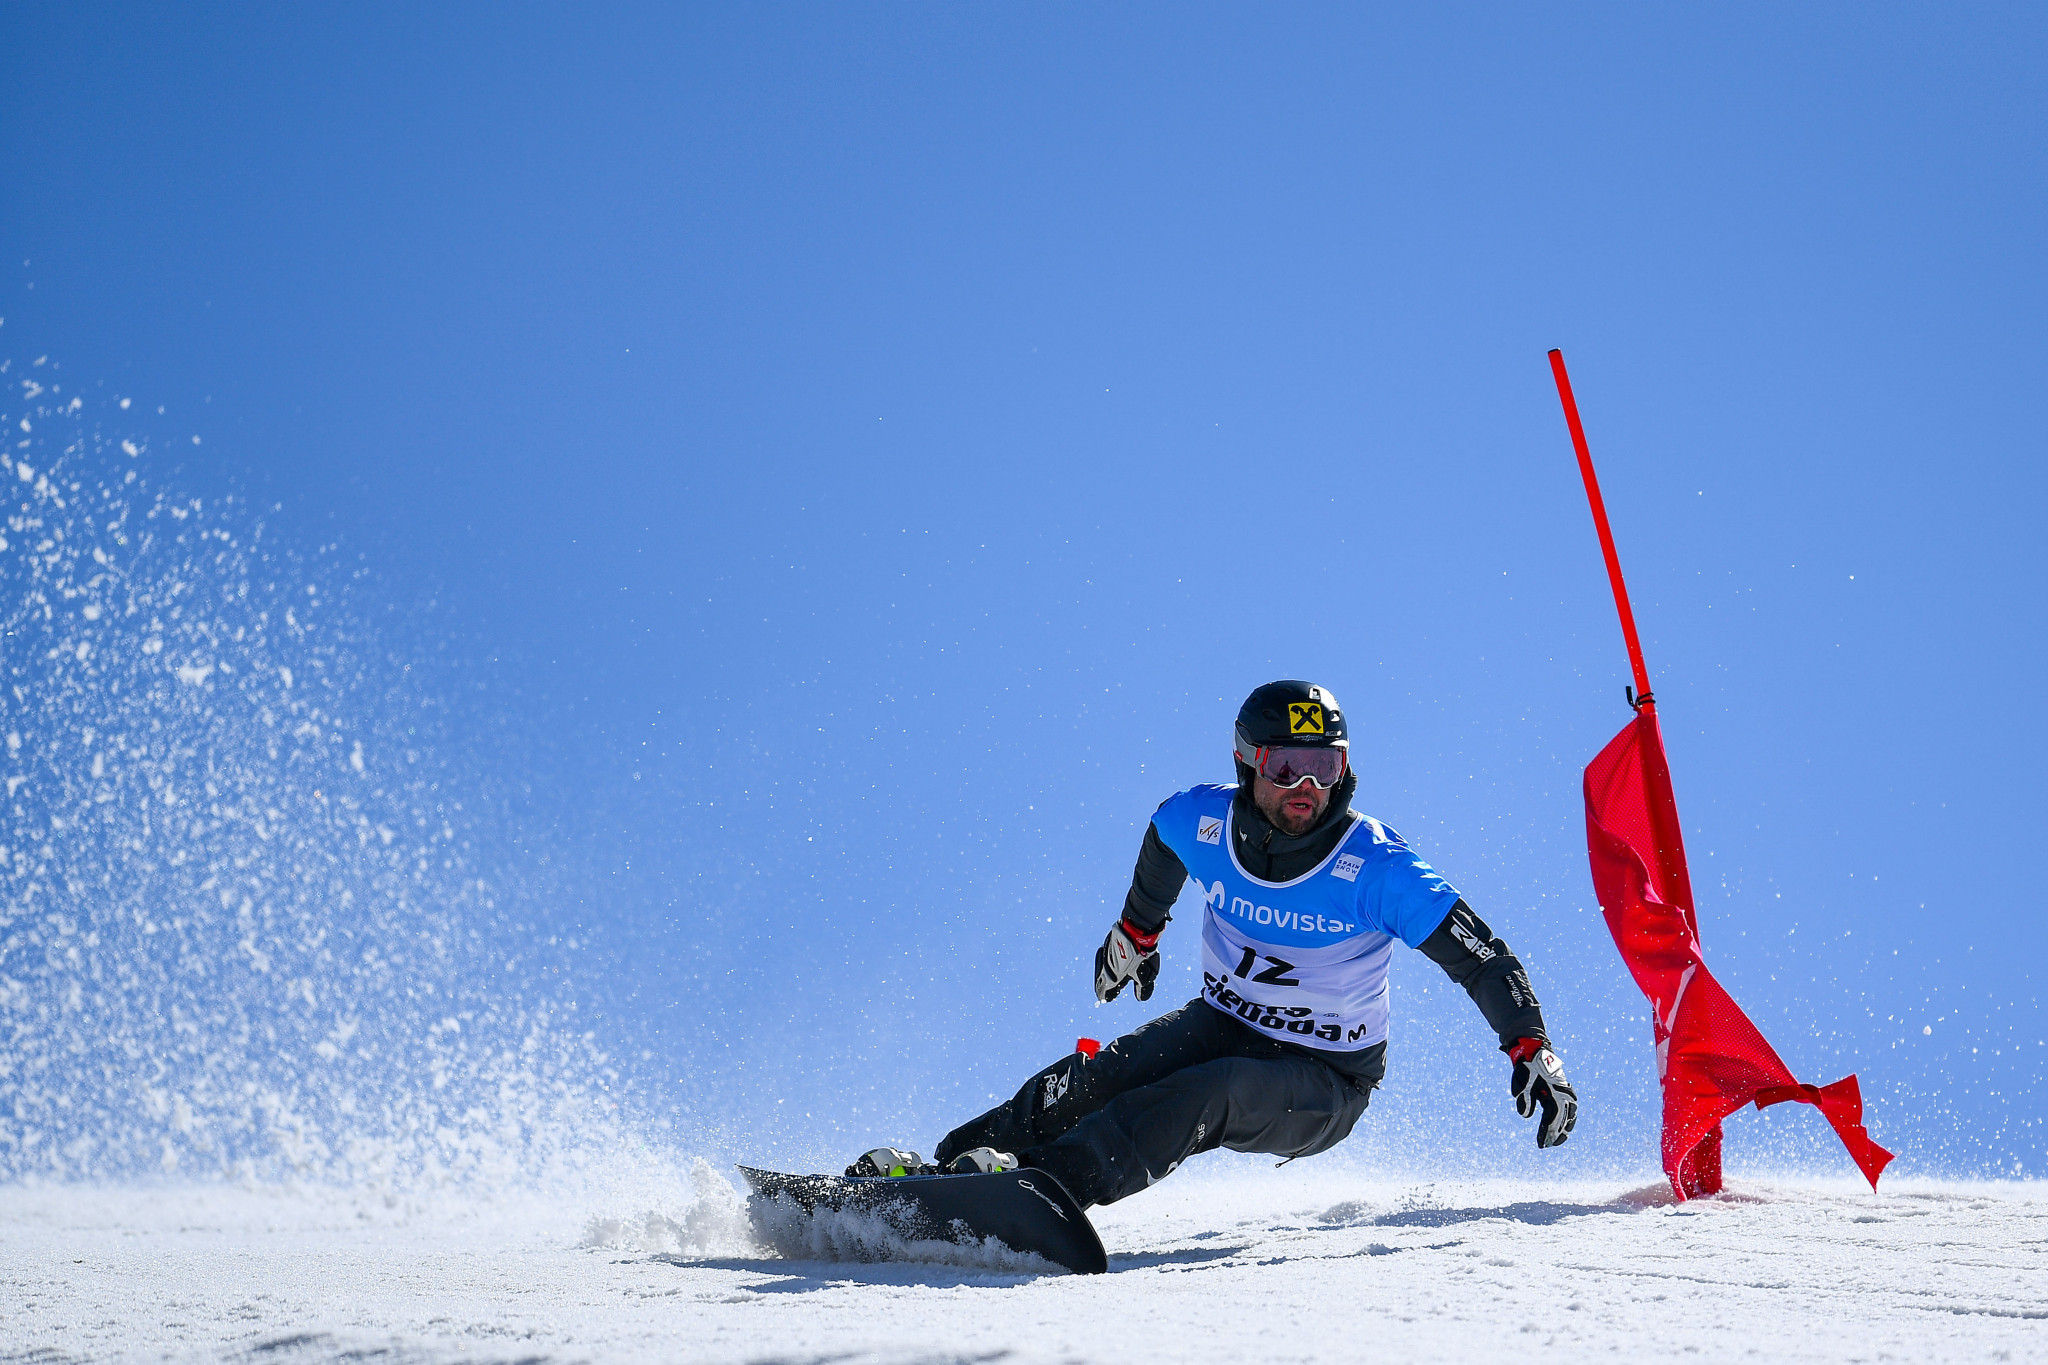 Prommegger wins second parallel giant slalom event in Pyeongchang to lead FIS Alpine Snowboard World Cup